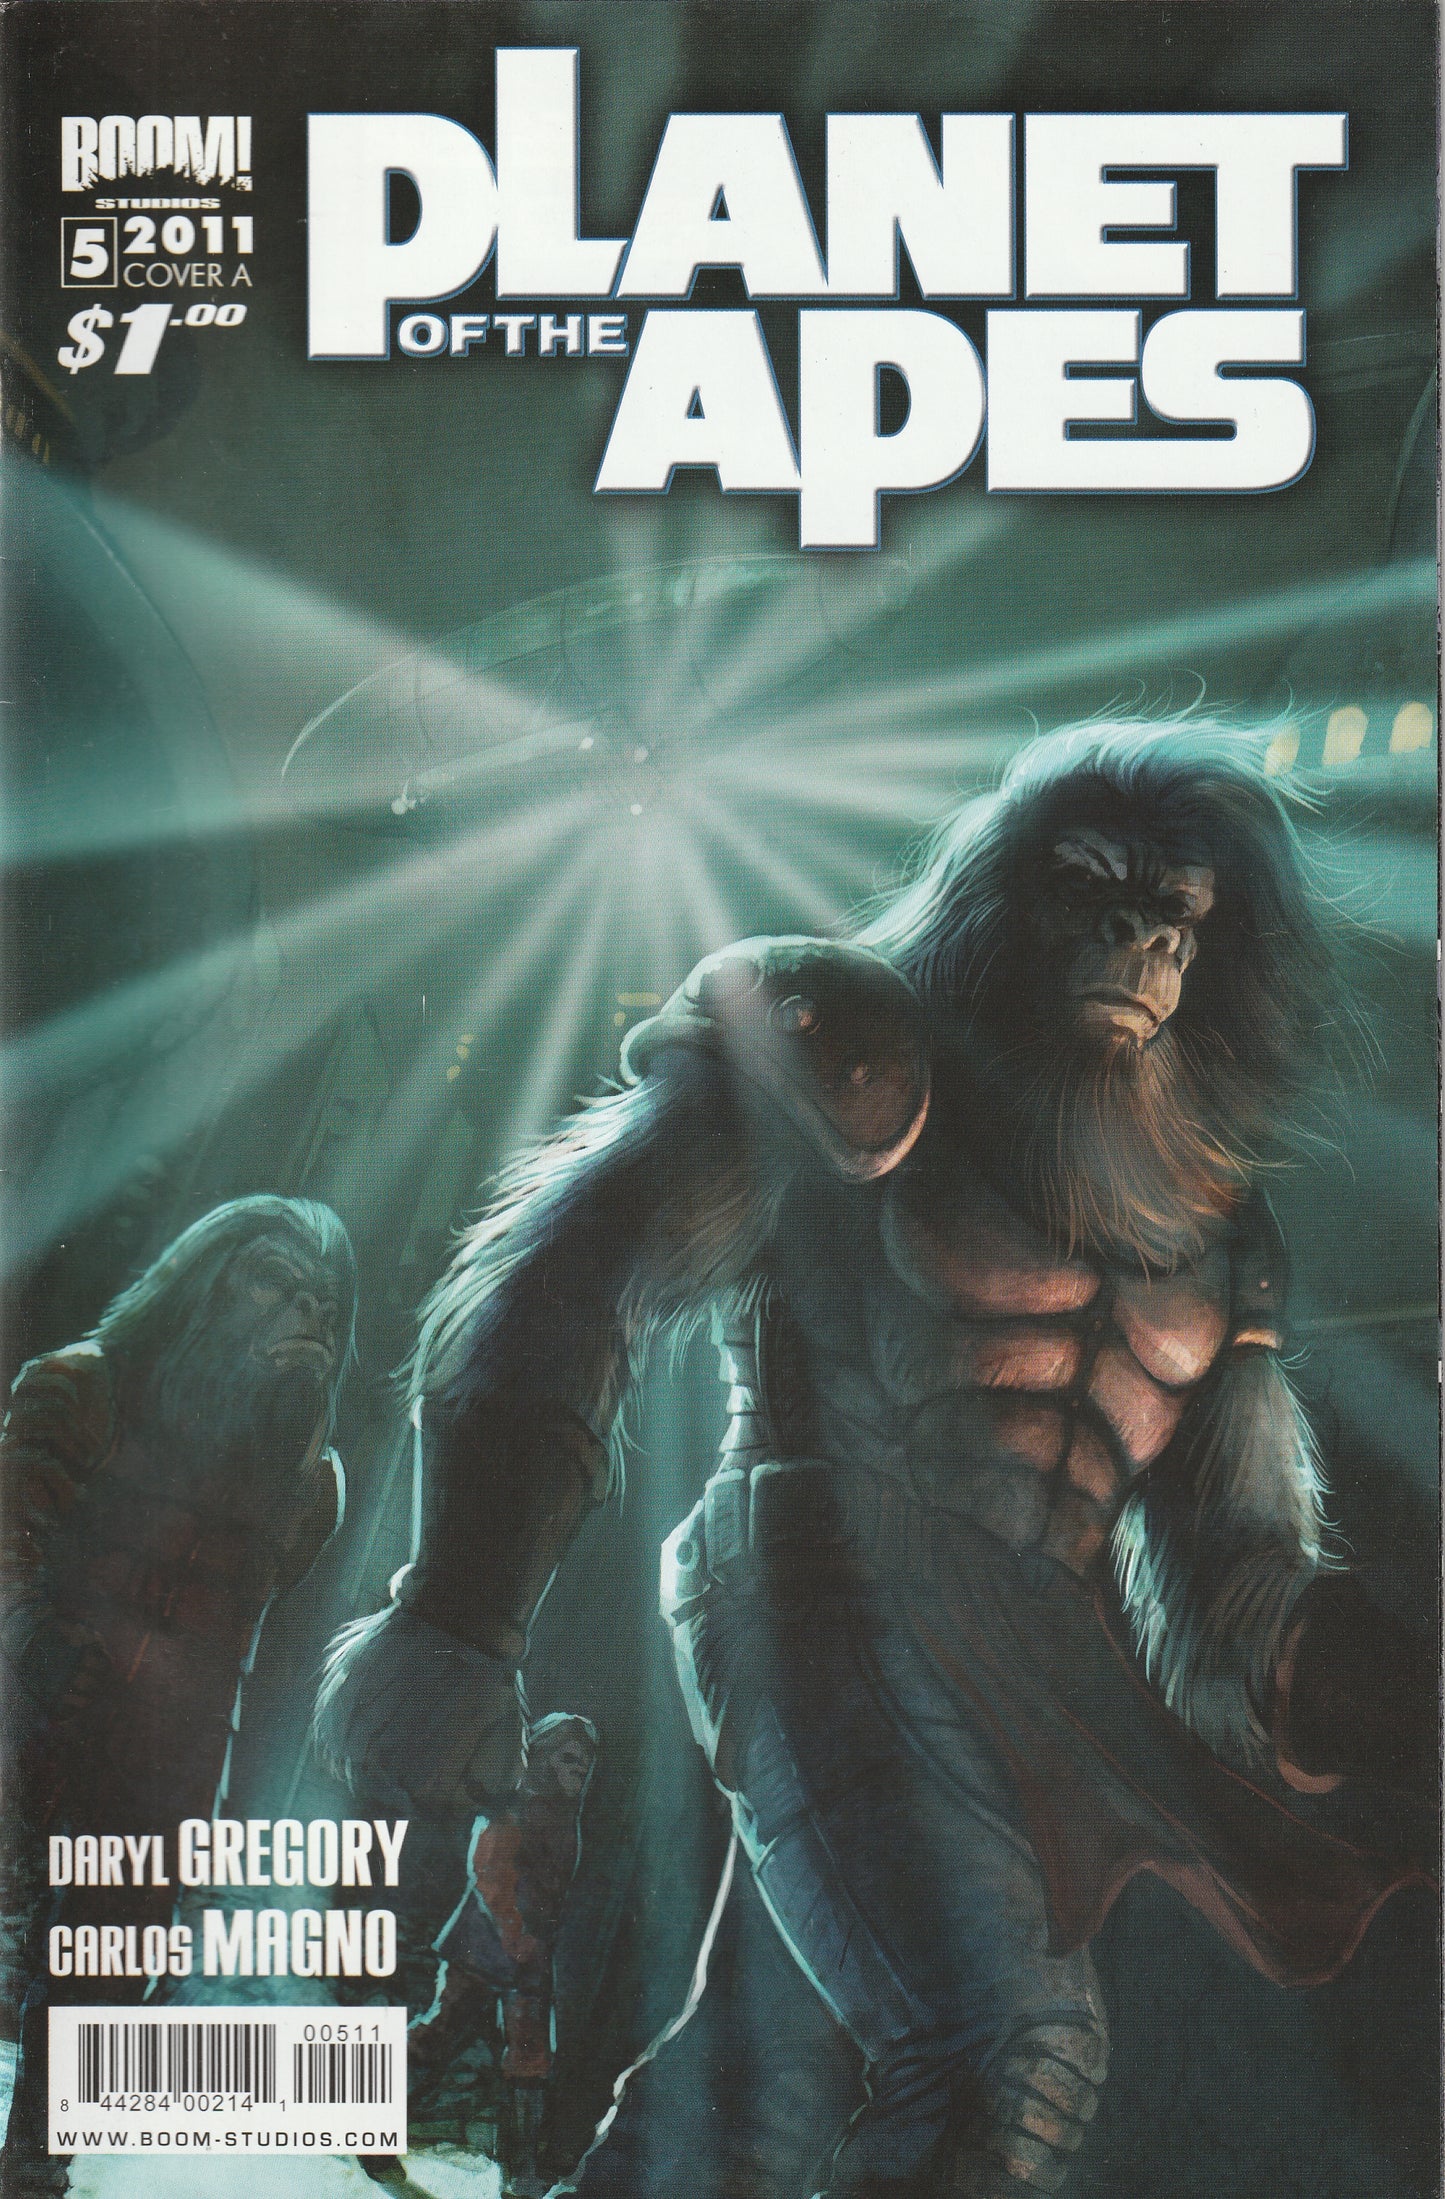 Planet of the Apes #5 (2011) - Cover A by Scott Keating